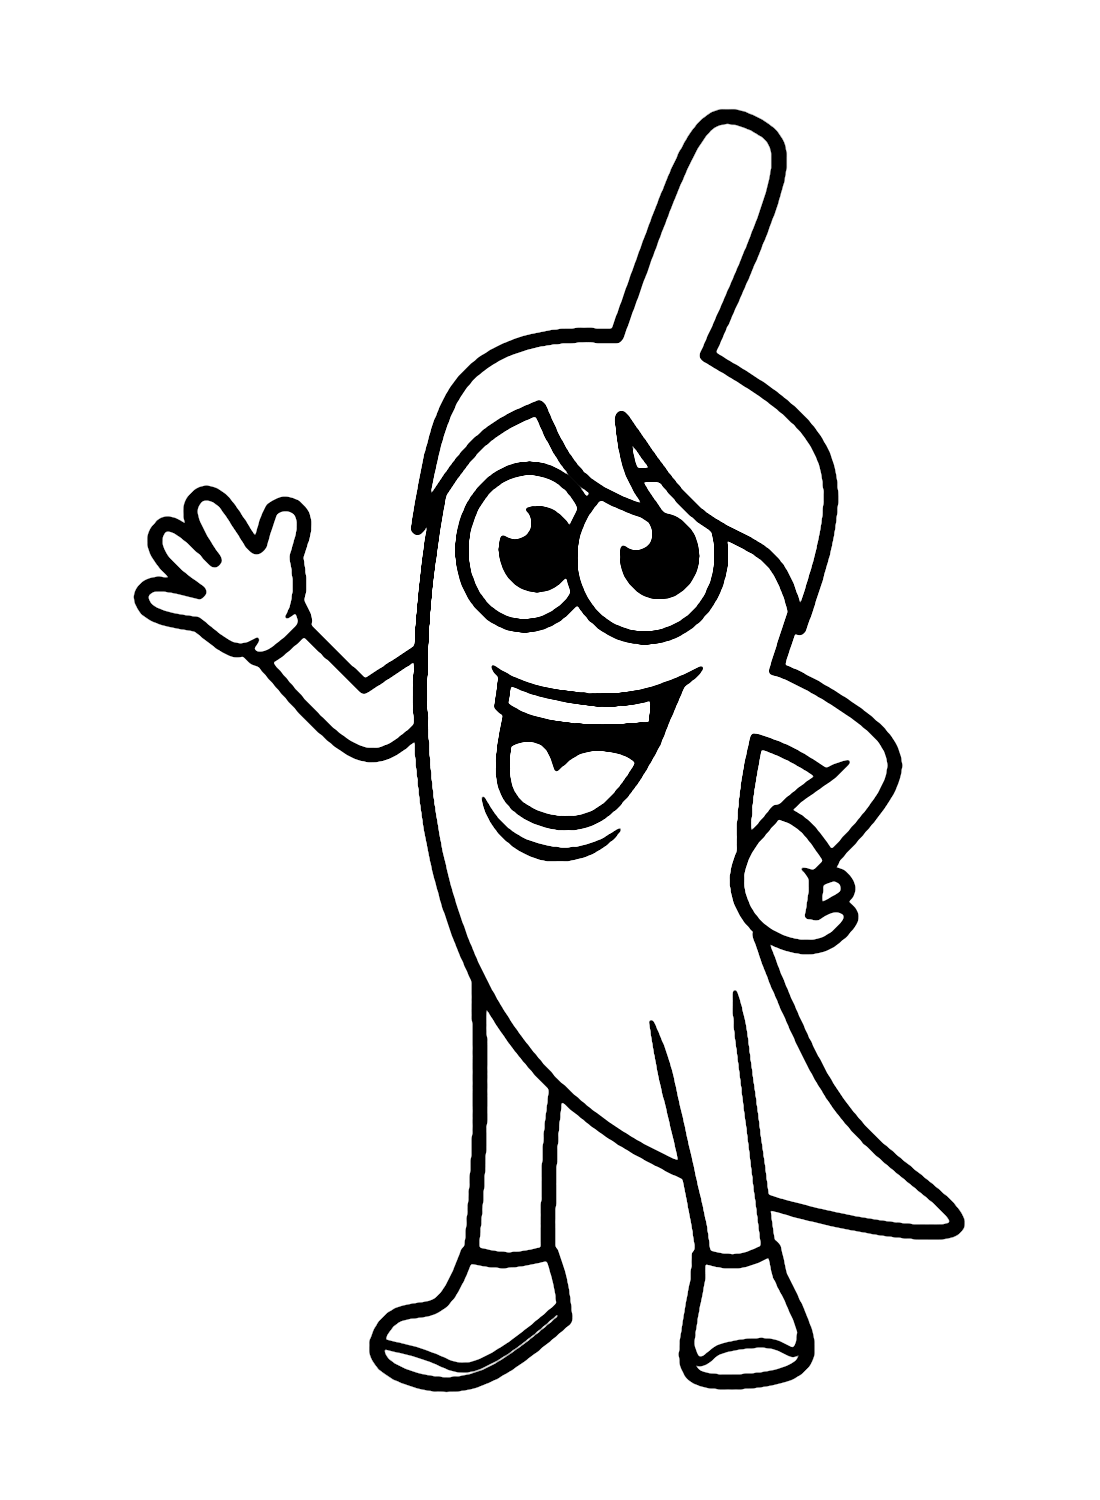 Chili Pepper Cartoon Coloring Page Free Printable Coloring Pages